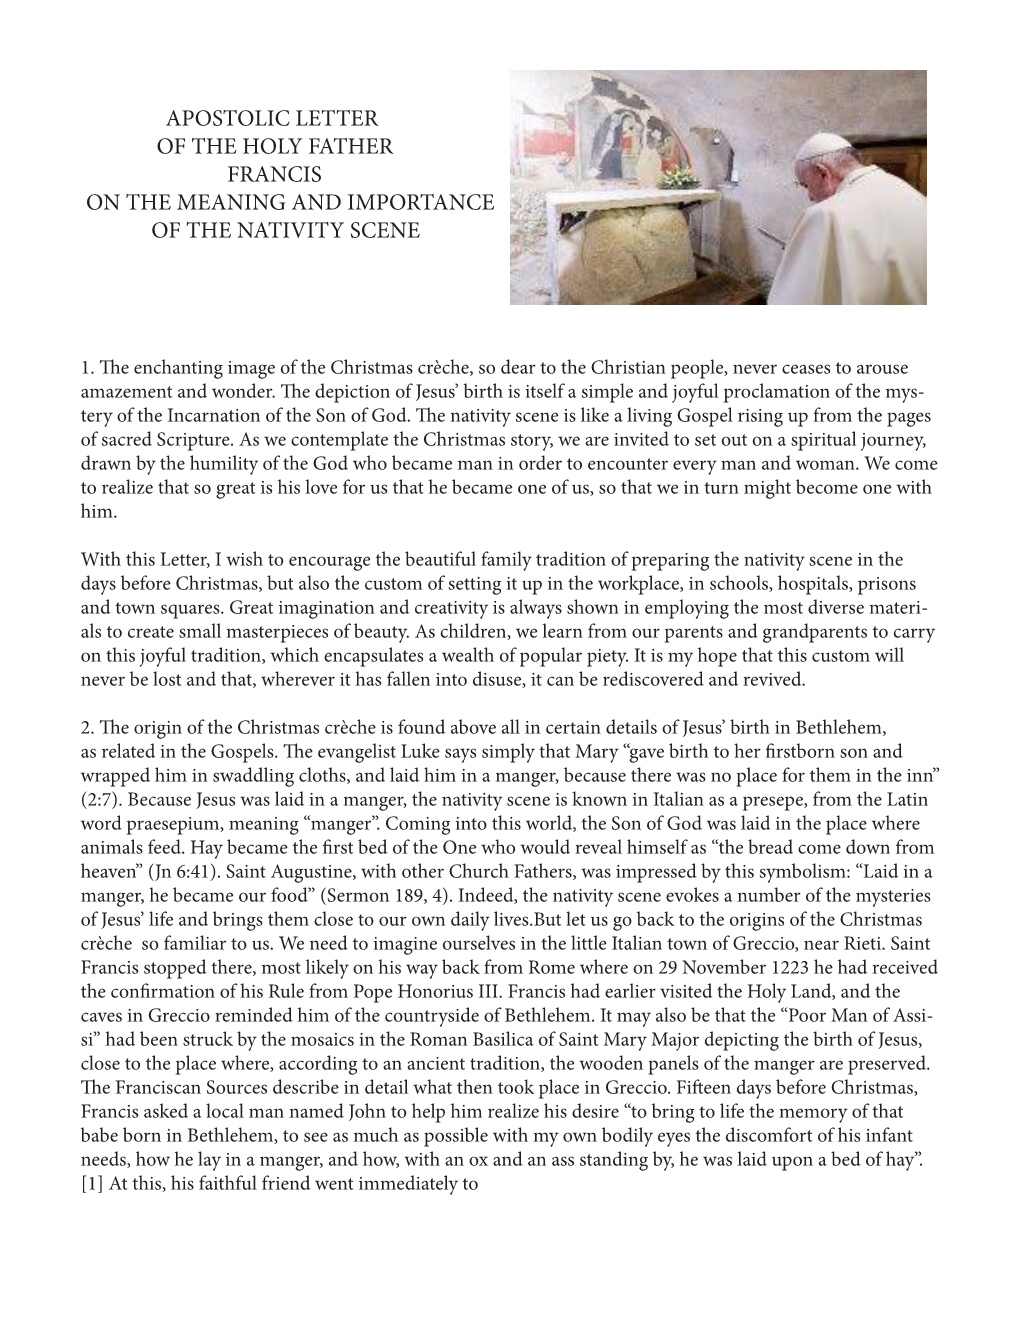 Apostolic Letter of the Holy Father Francis on the Meaning and Importance of the Nativity Scene